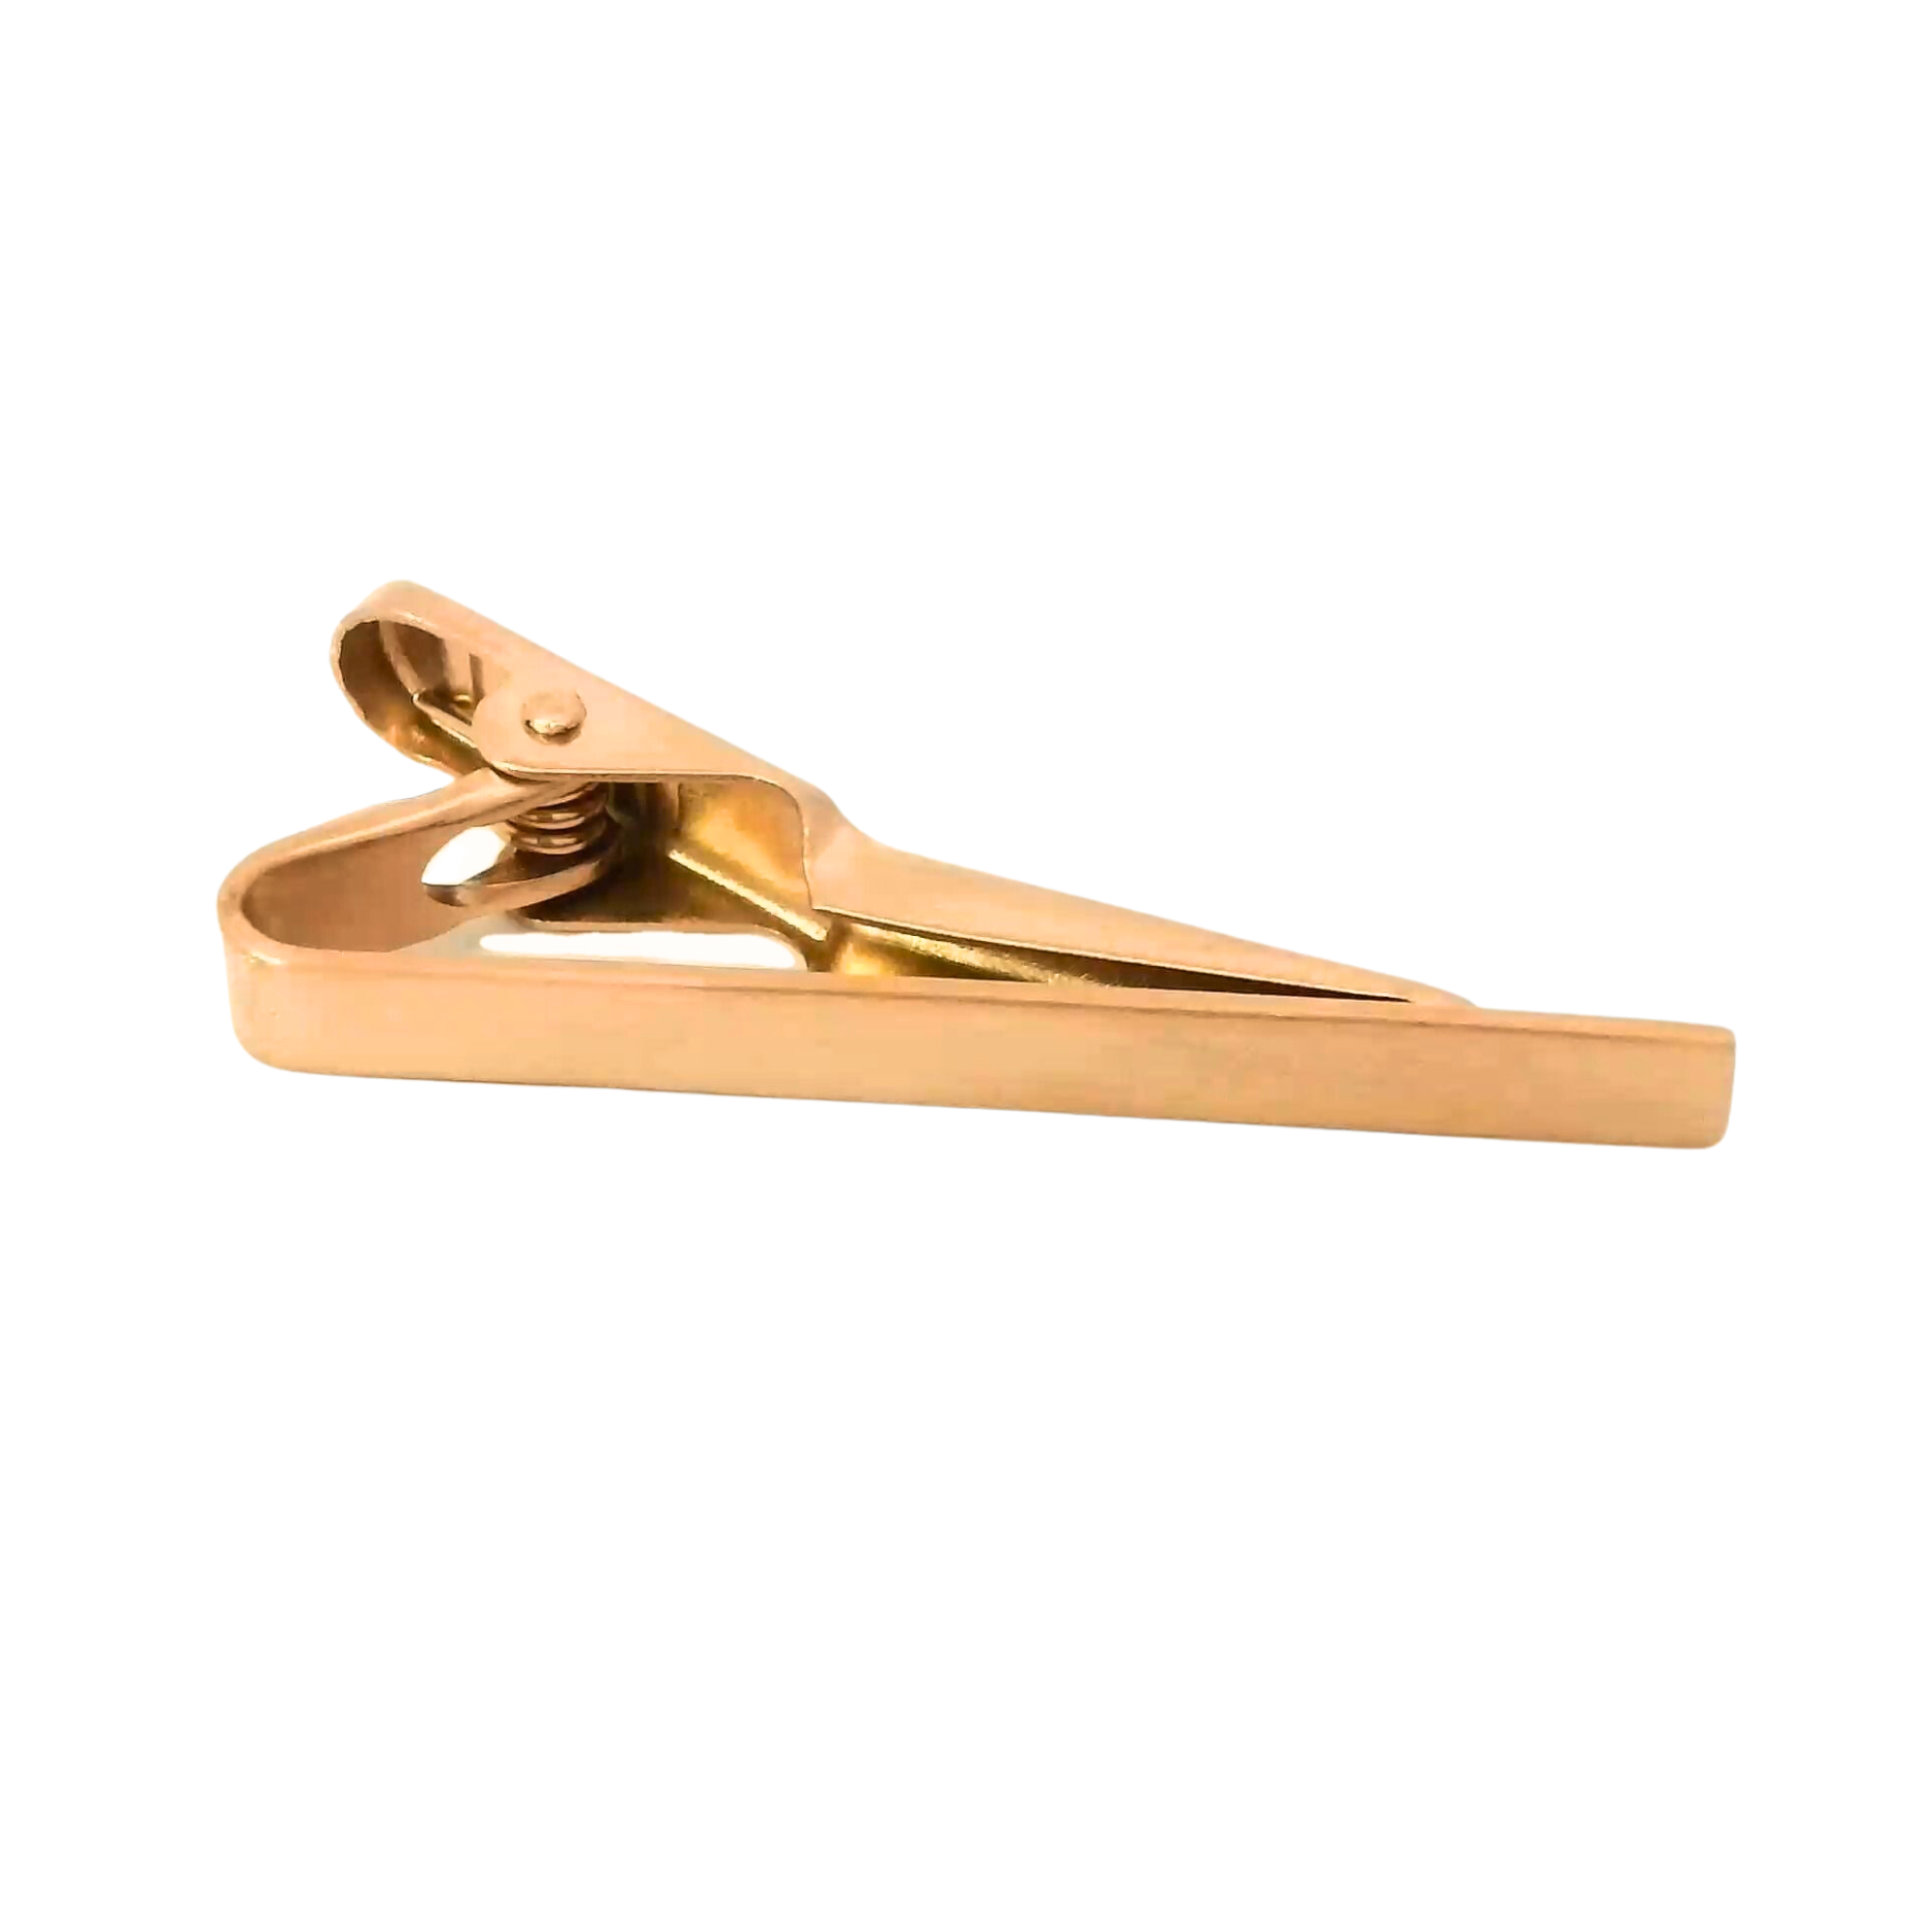 Small Brushed Rose Gold Tie Clip 40mm